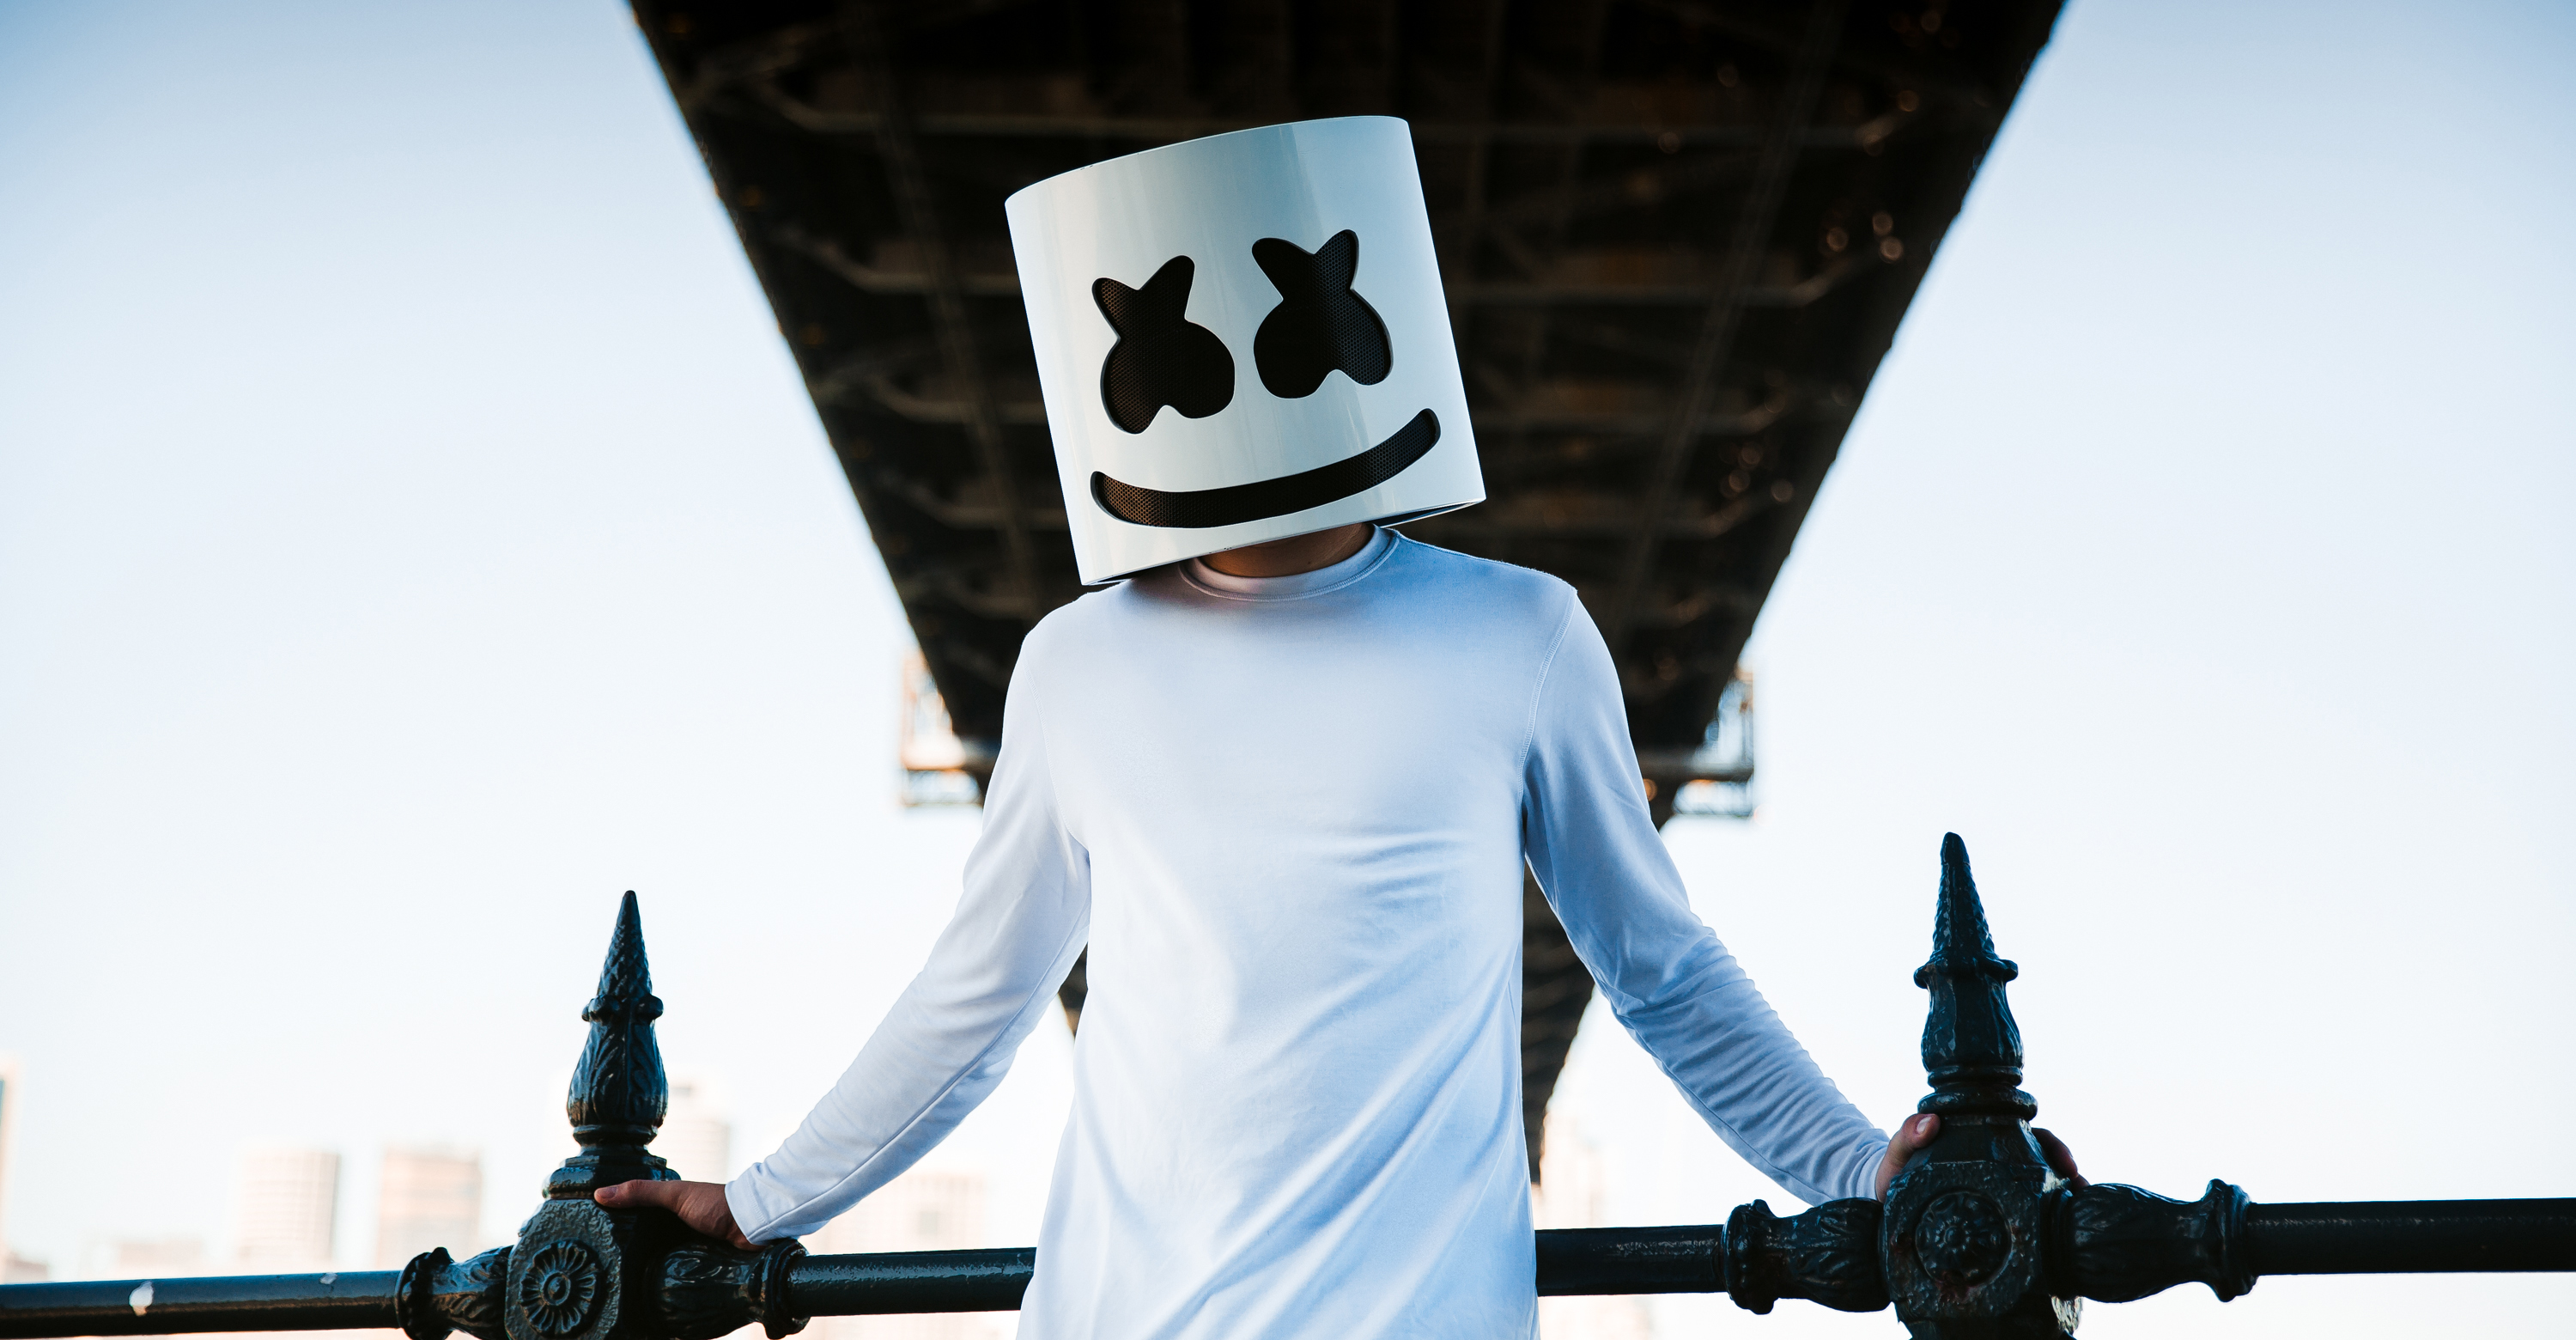 marshmello-dj-mask-hd-music-4k-wallpapers-images-backgrounds